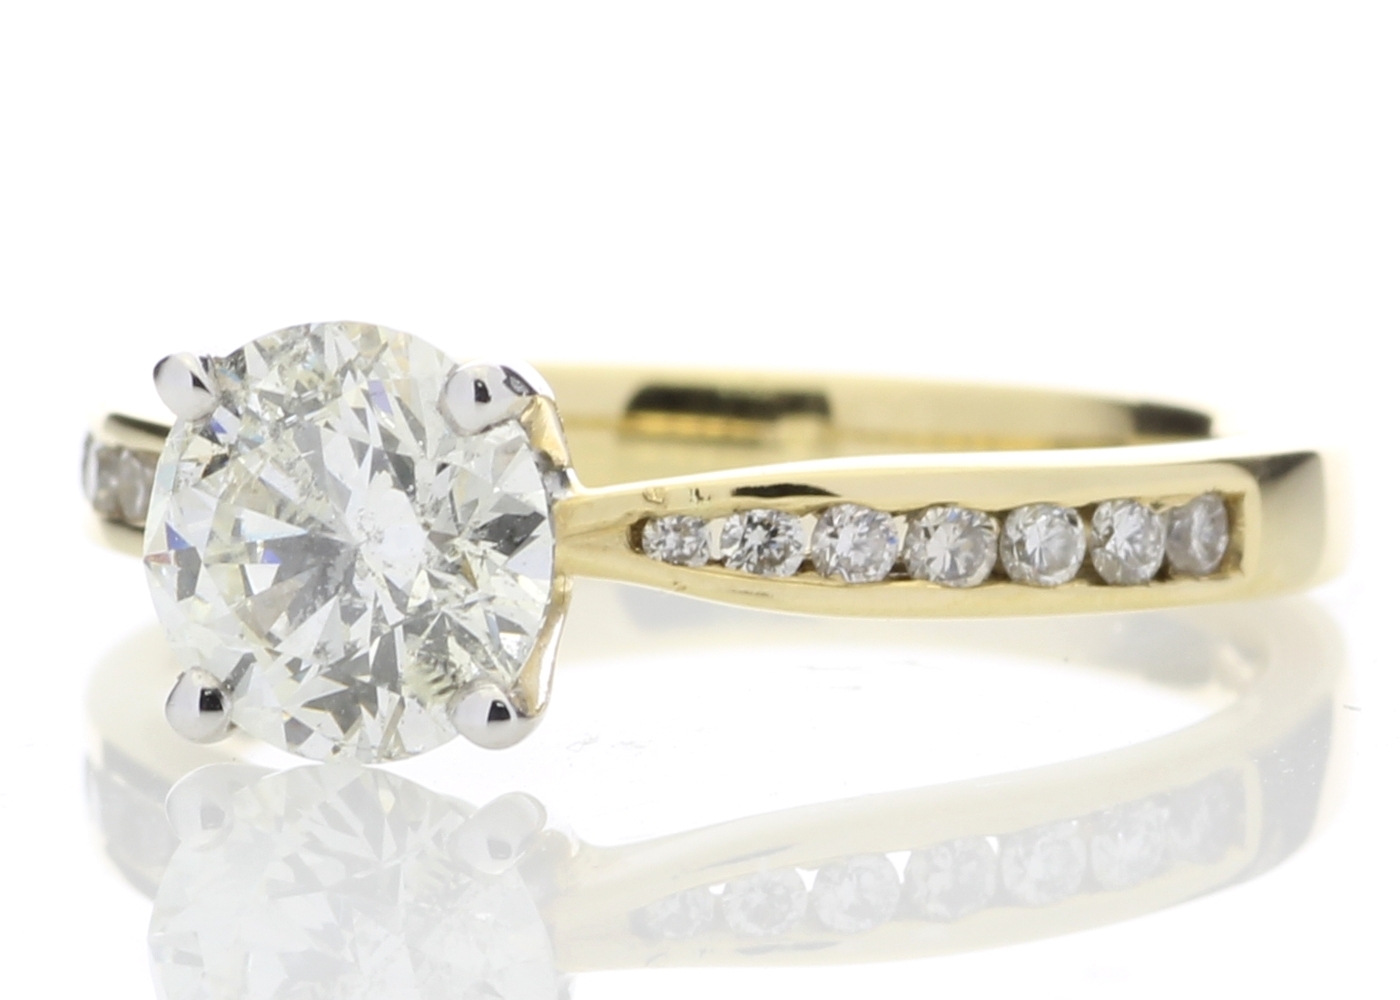 18ct Yellow Gold Single Stone Diamond Ring With Stone Set Shoulders (1.11) 1.28 - Image 2 of 5